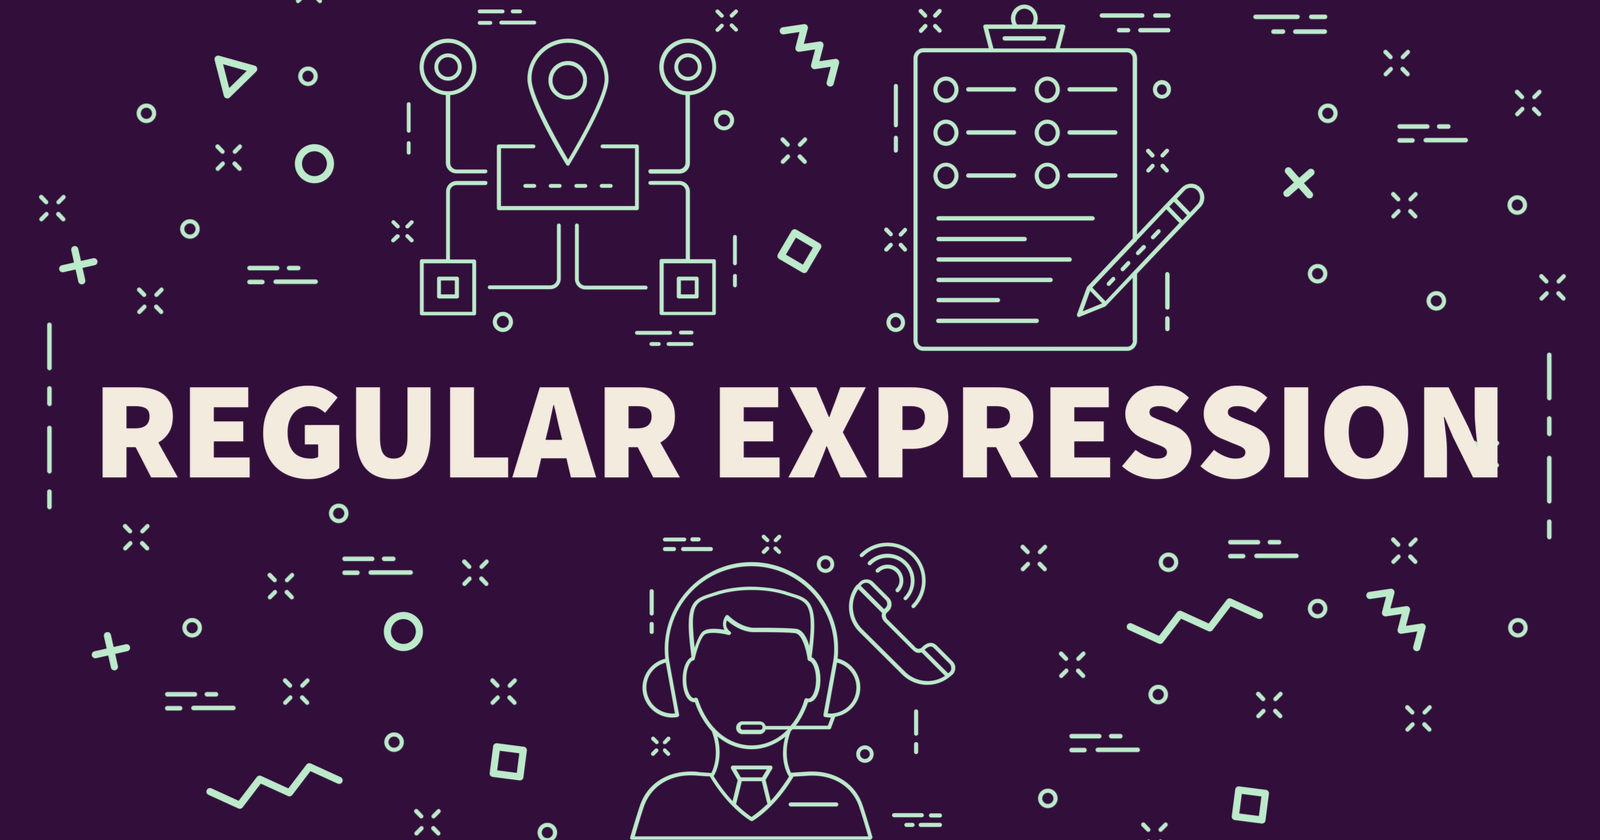 Regex For SEO: A Guide To Regular Expressions (With Use Cases) via @sejournal, @TaylorDanRW